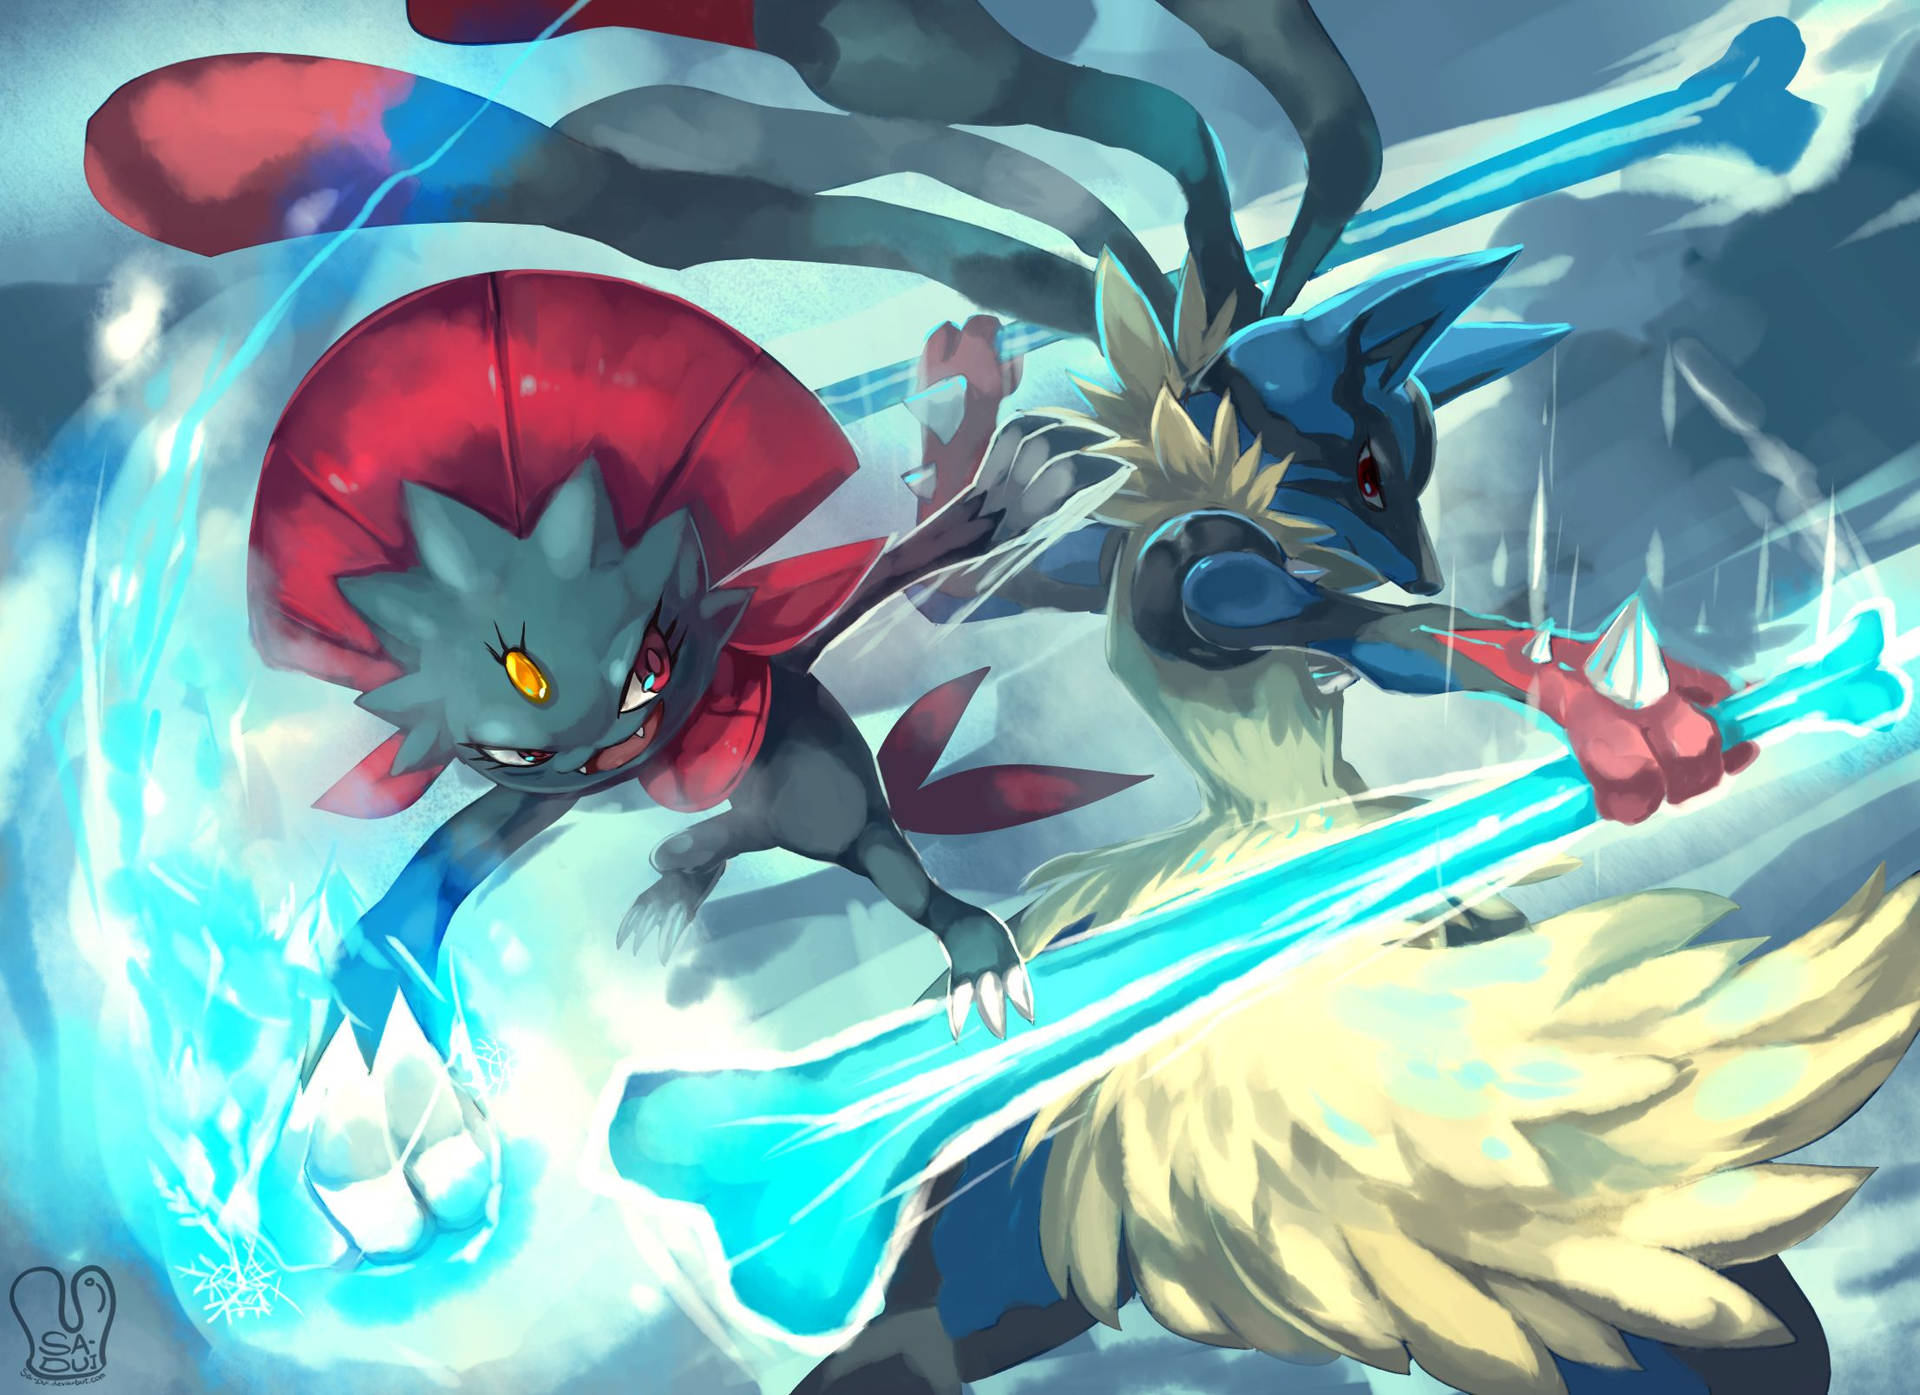 Two Powerful Pokemon Battle It Out In This Epic Clash. Background